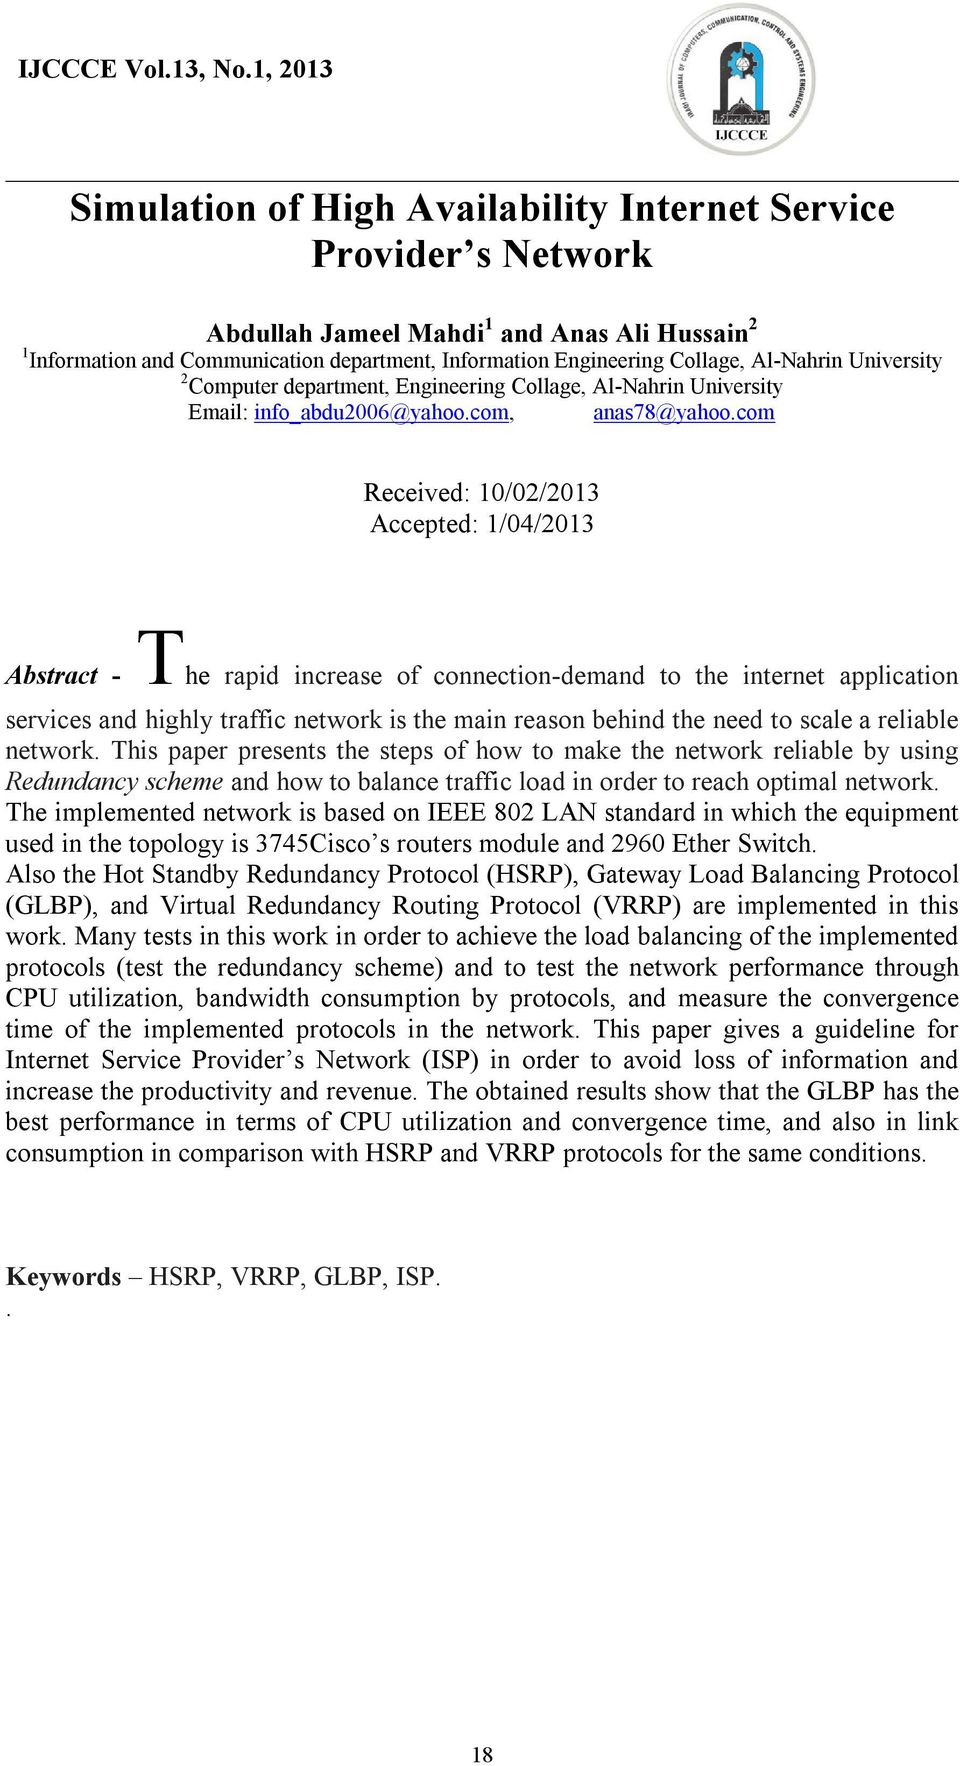 com Received: 10/02/2013 Accepted: 1/04/2013 Abstract - The rapid increase of connection-demand to the internet application services and highly traffic network is the main reason behind the need to